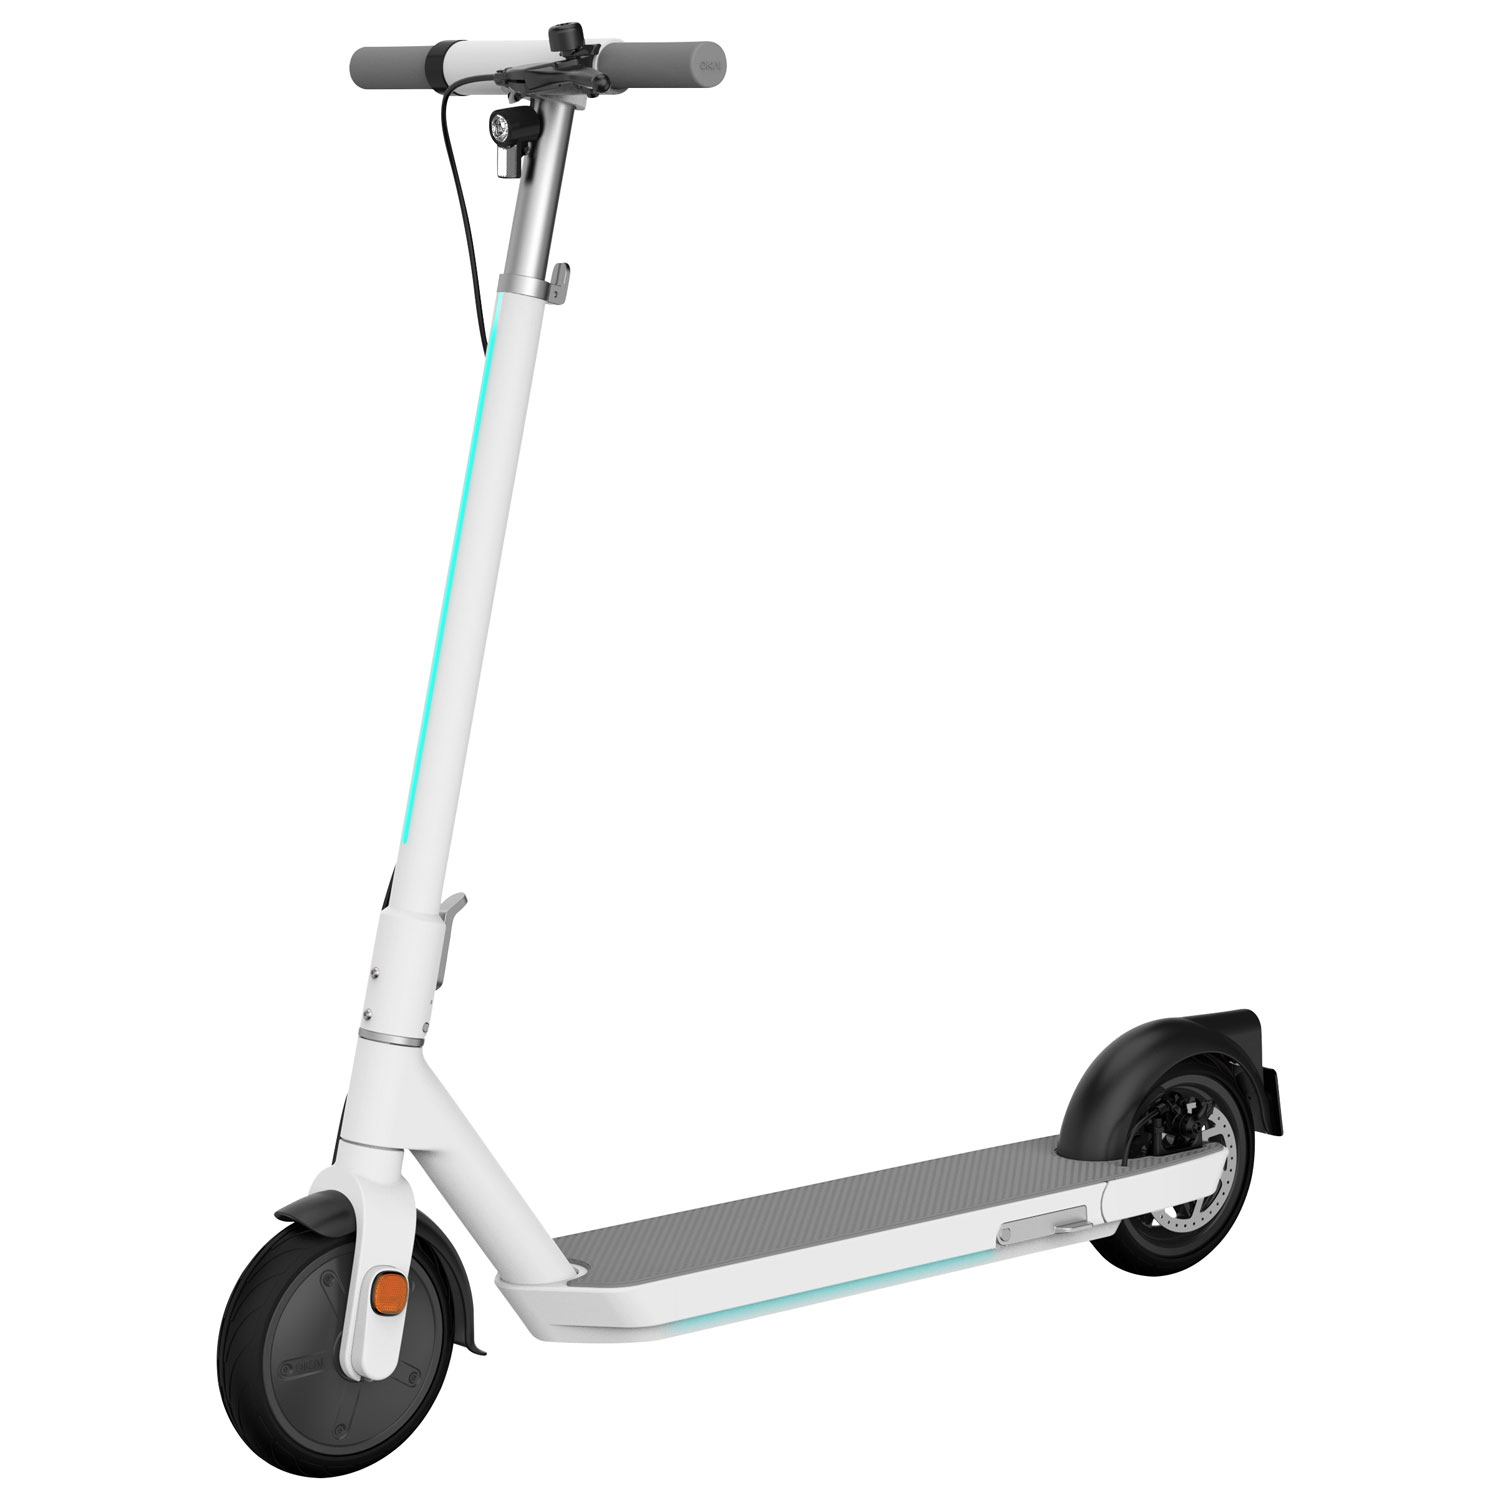 OKAI Neon ES20 Adult Electric Scooter (300-600W Motor / 40km Range / 25km/h Top Speed) - White - Only at Best Buy